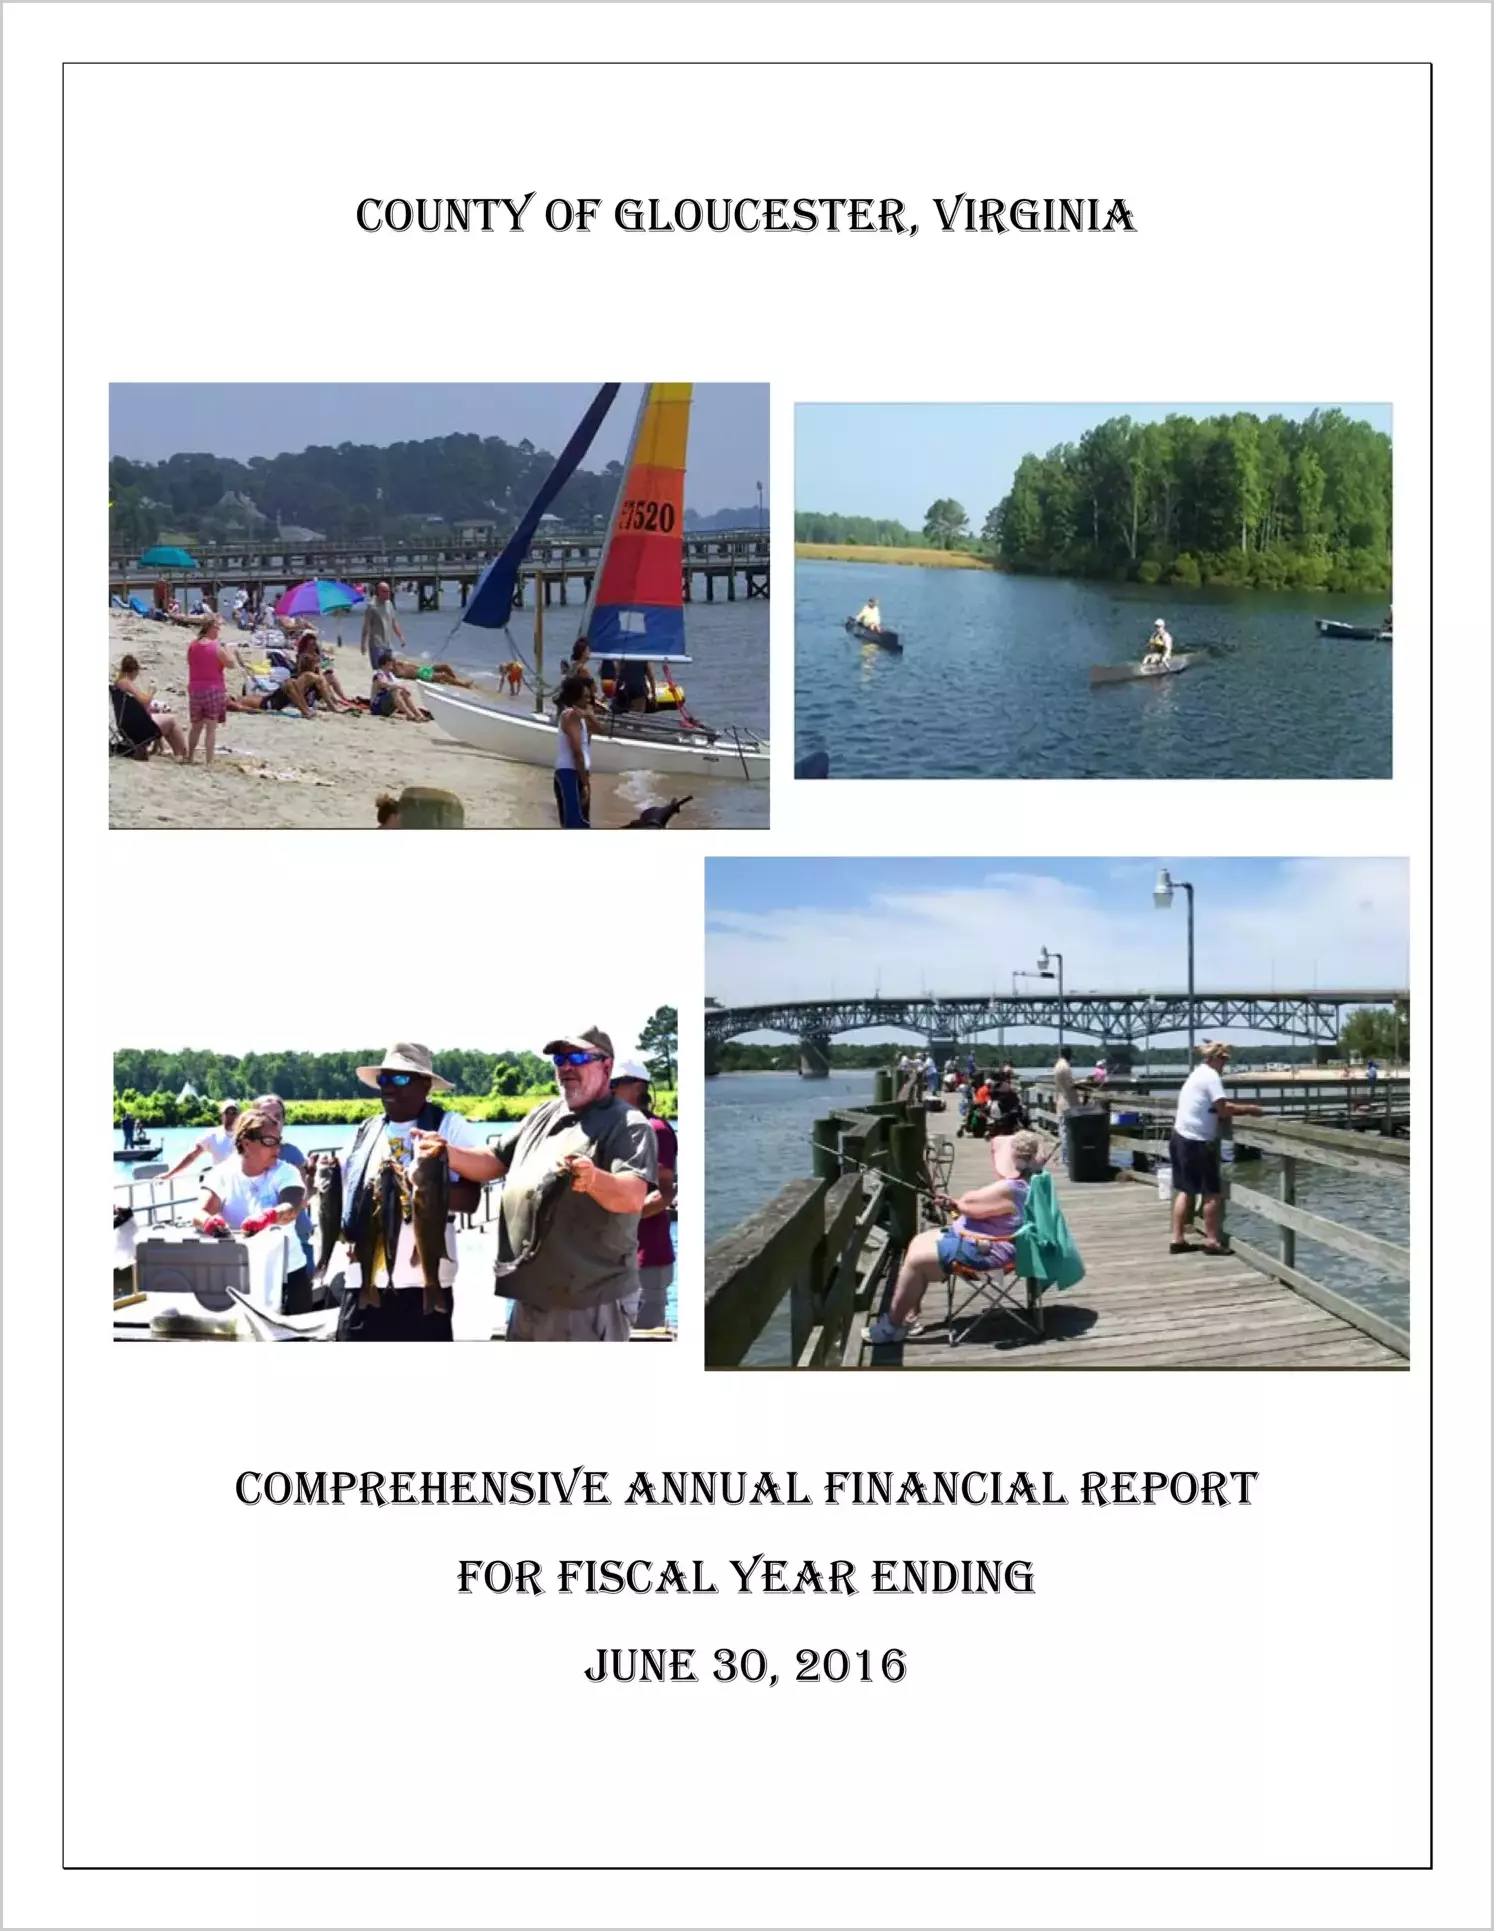 2016 Annual Financial Report for County of Gloucester